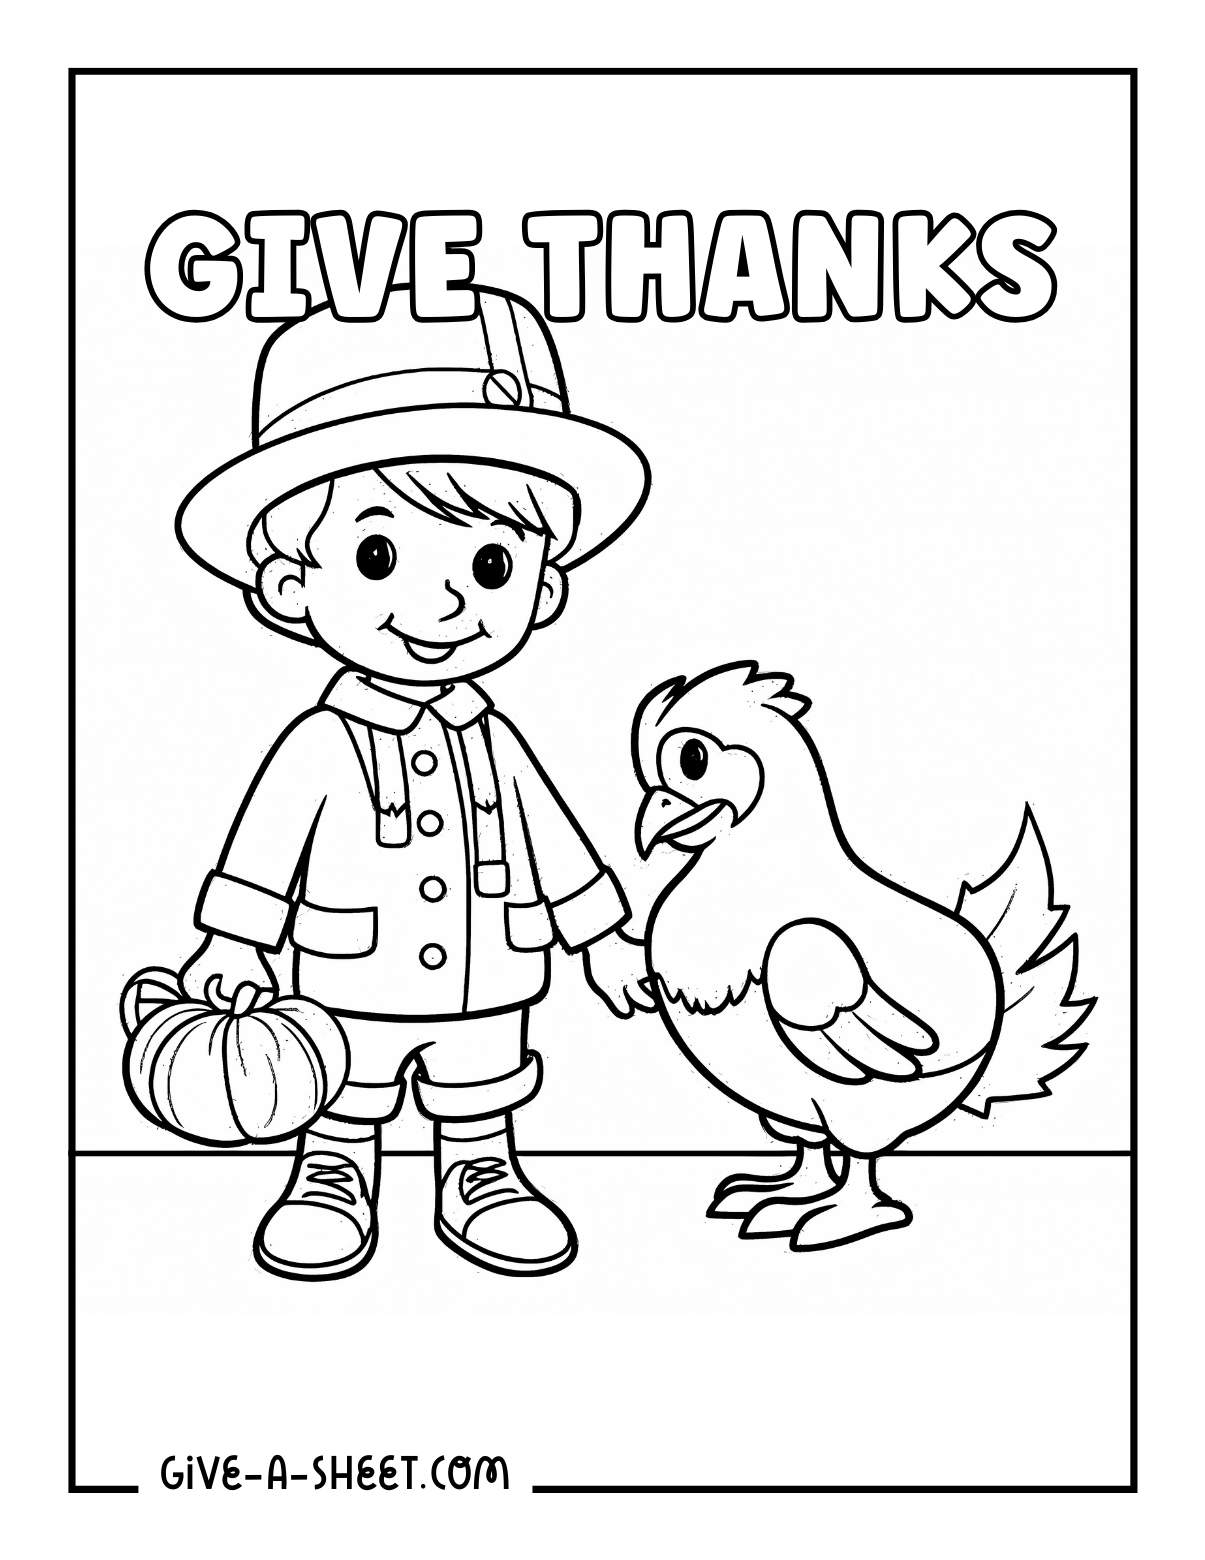 Great thanksgiving coloring pages for kids.